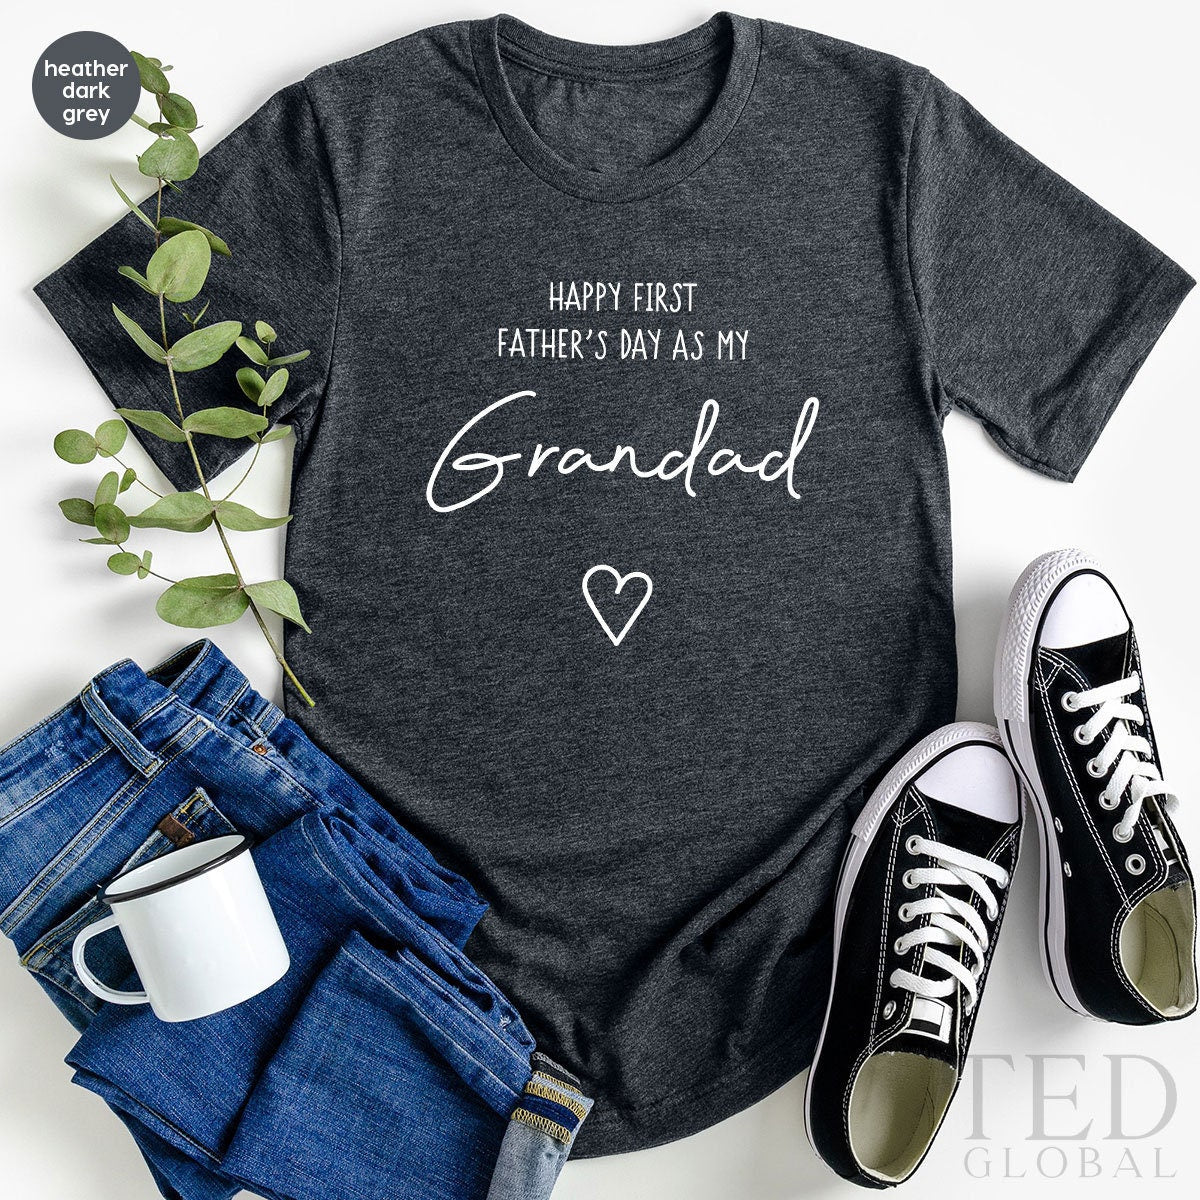 First Fathers Day Shirt, Grandad Shirt, New Grandpa Shirt, Grandpa Fathers Day Gift, Grandpa to Be Shirt, Baby Announcement for Dad